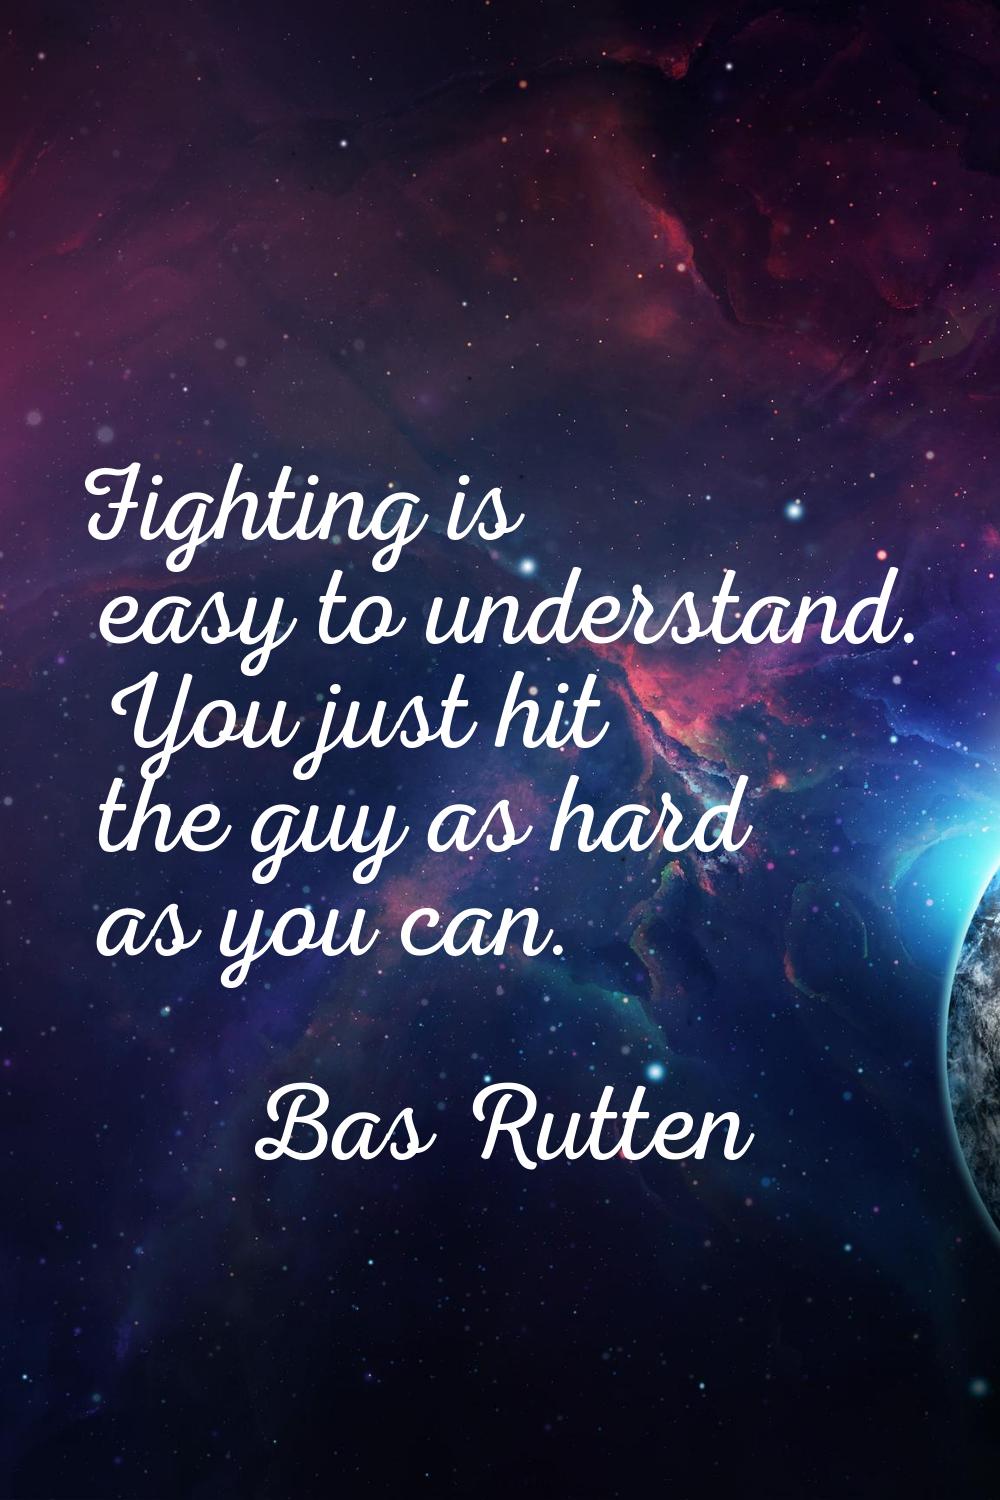 Fighting is easy to understand. You just hit the guy as hard as you can.